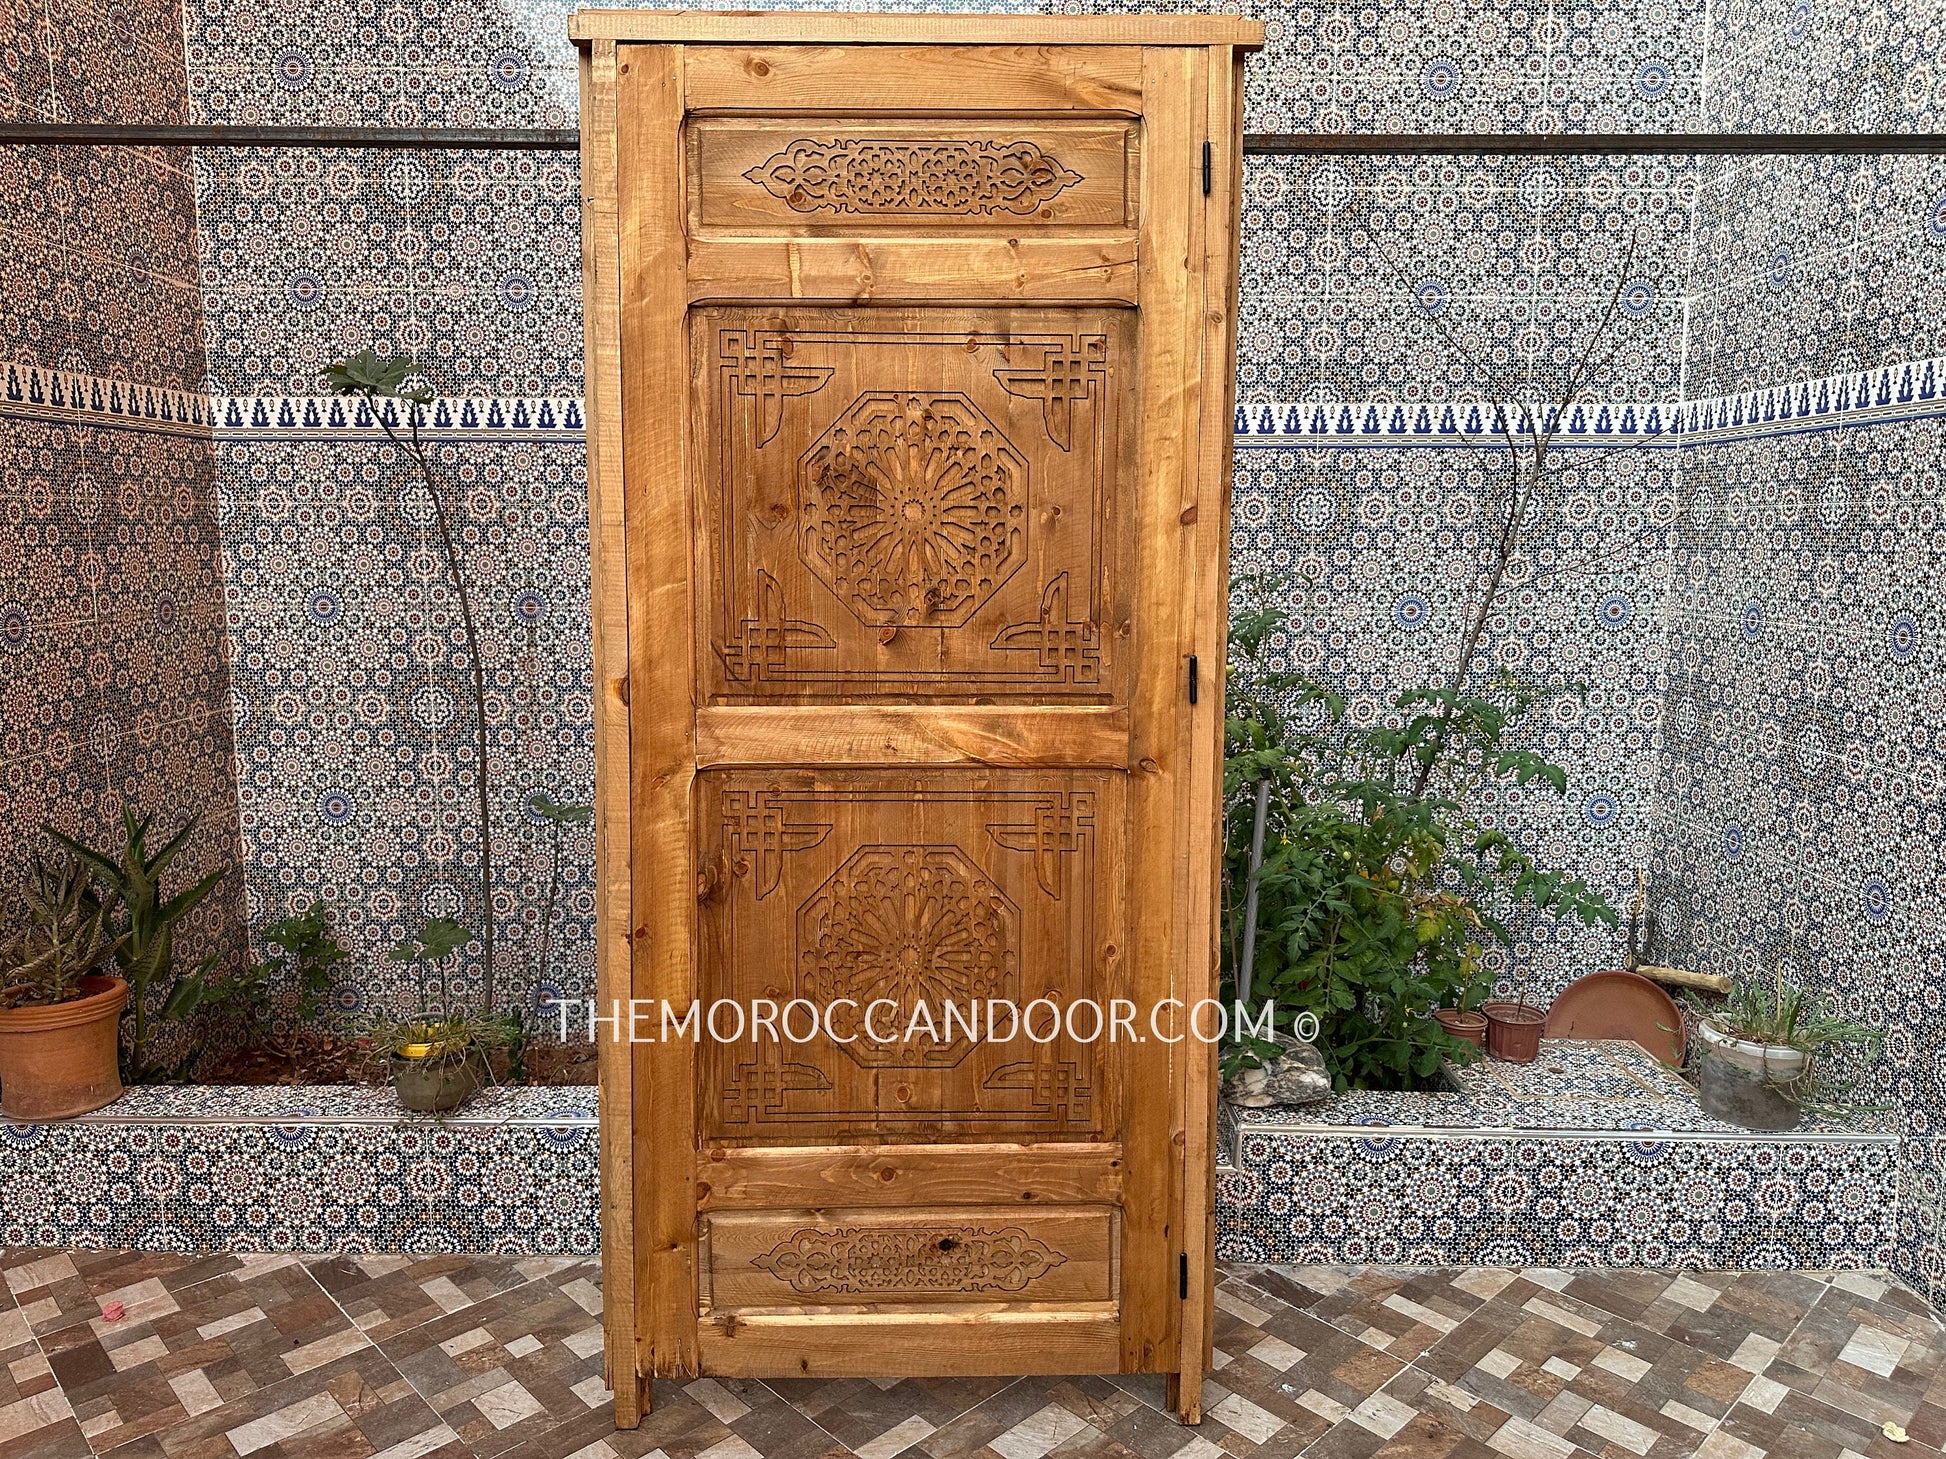 Customizable hand-carved wooden door for a personalized touch